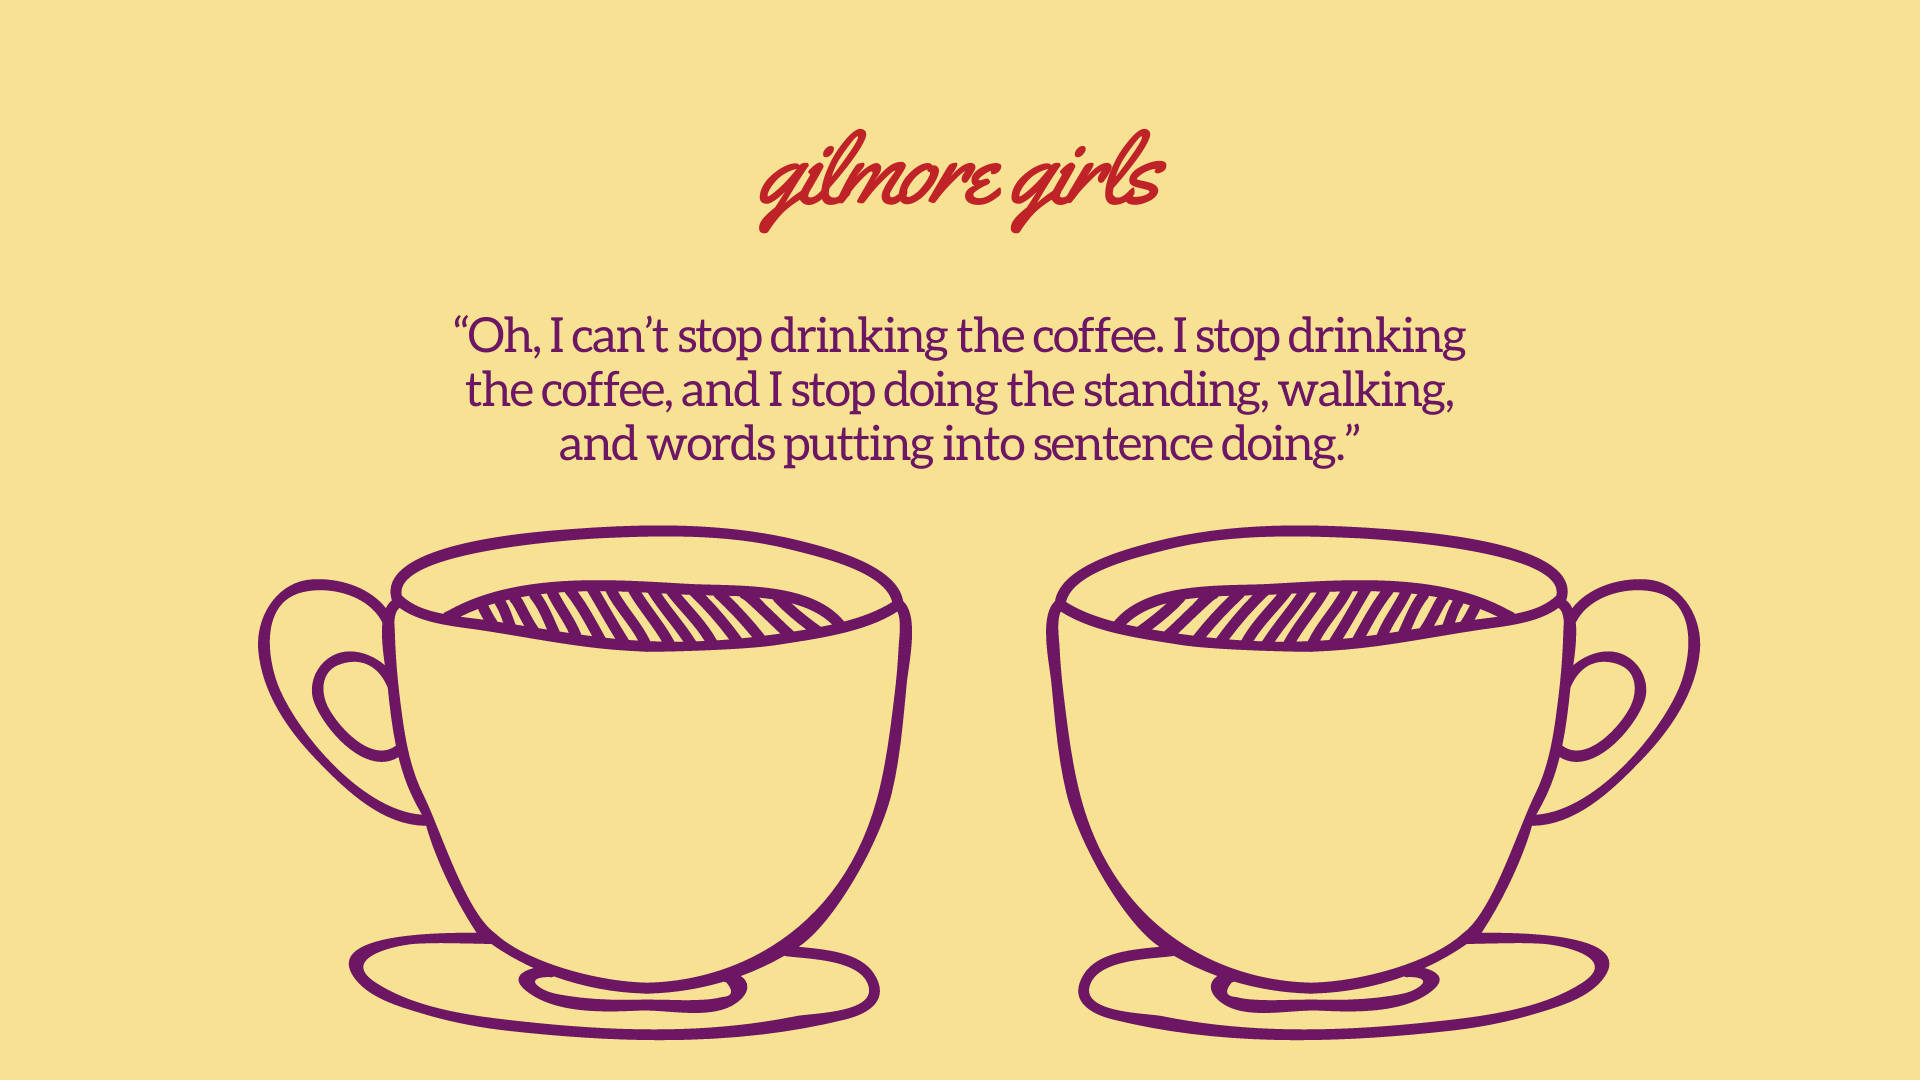 Gilmore Girls Iconic Coffee Quote